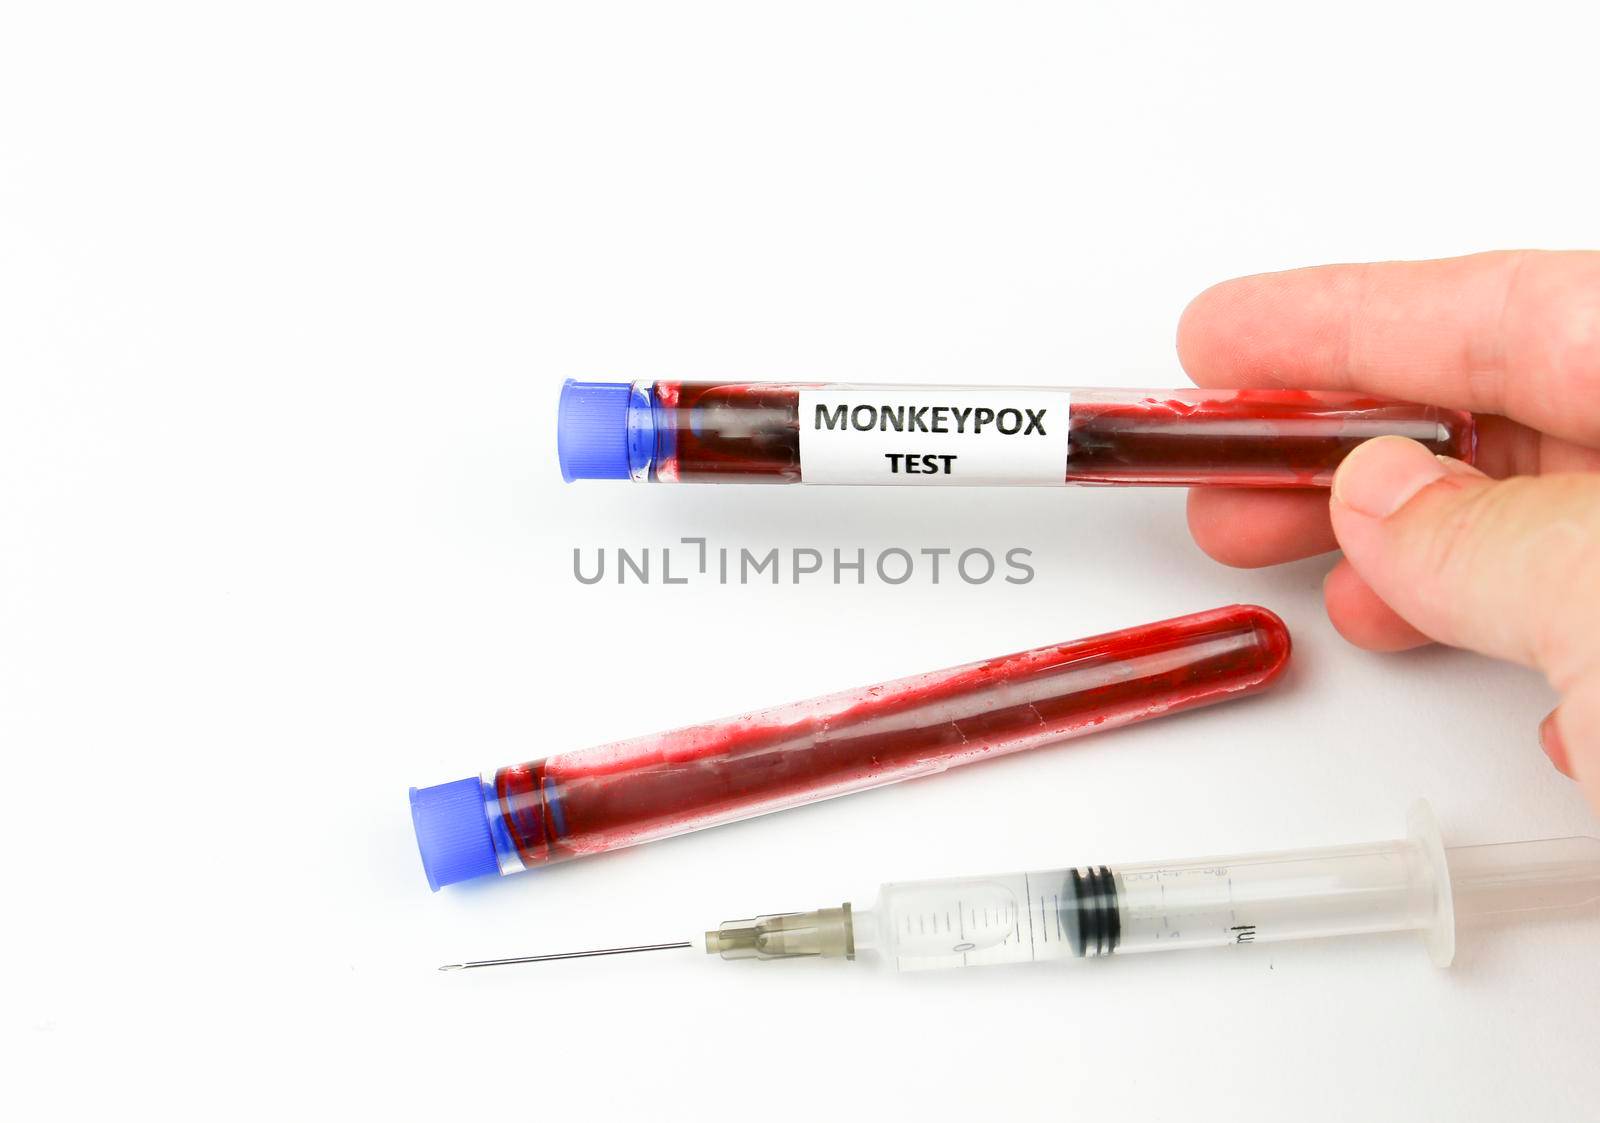 Test tubes with blood for testing and syringe with Monkeypox vaccine by soniabonet